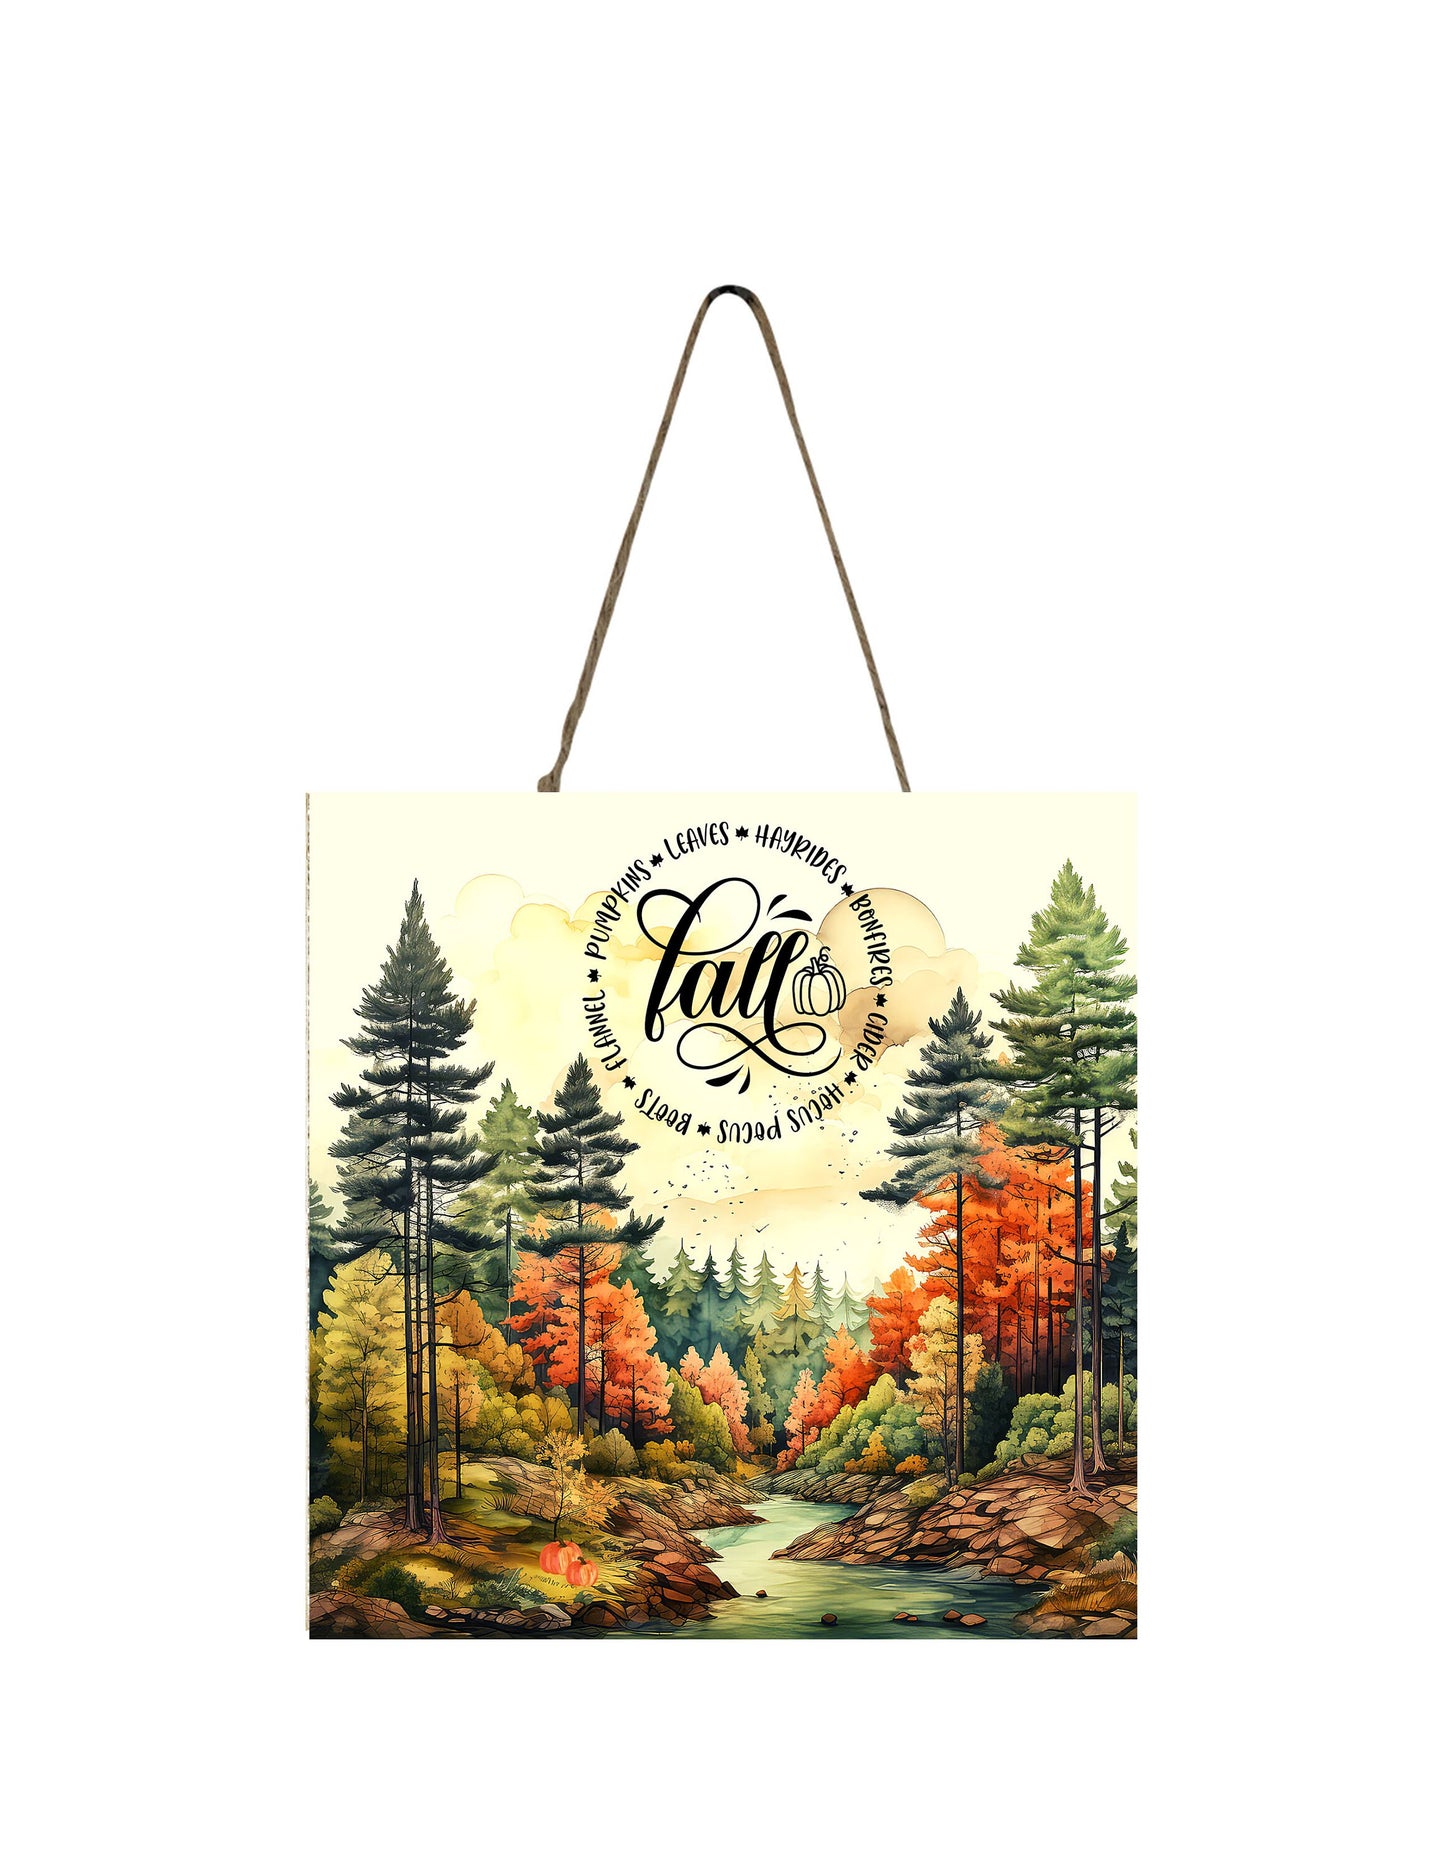 New Releases Fall Forest Hanging Wall Mini Sign Wood Home Decor, Door Hanger, Wreath Sign